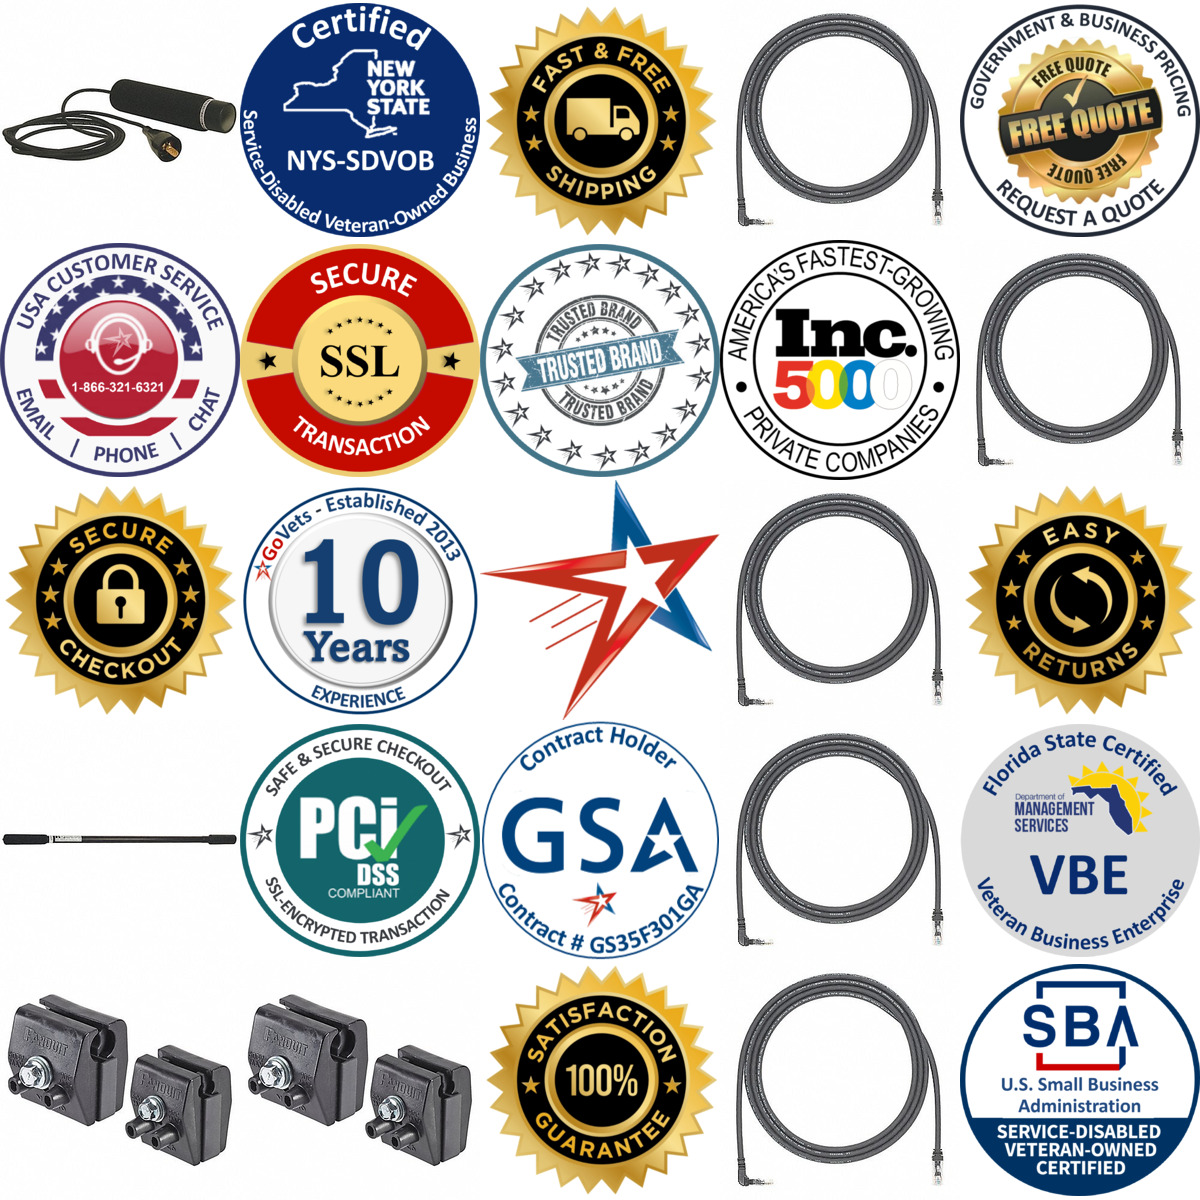 A selection of Voltage and Continuity Tester Accessories products on GoVets